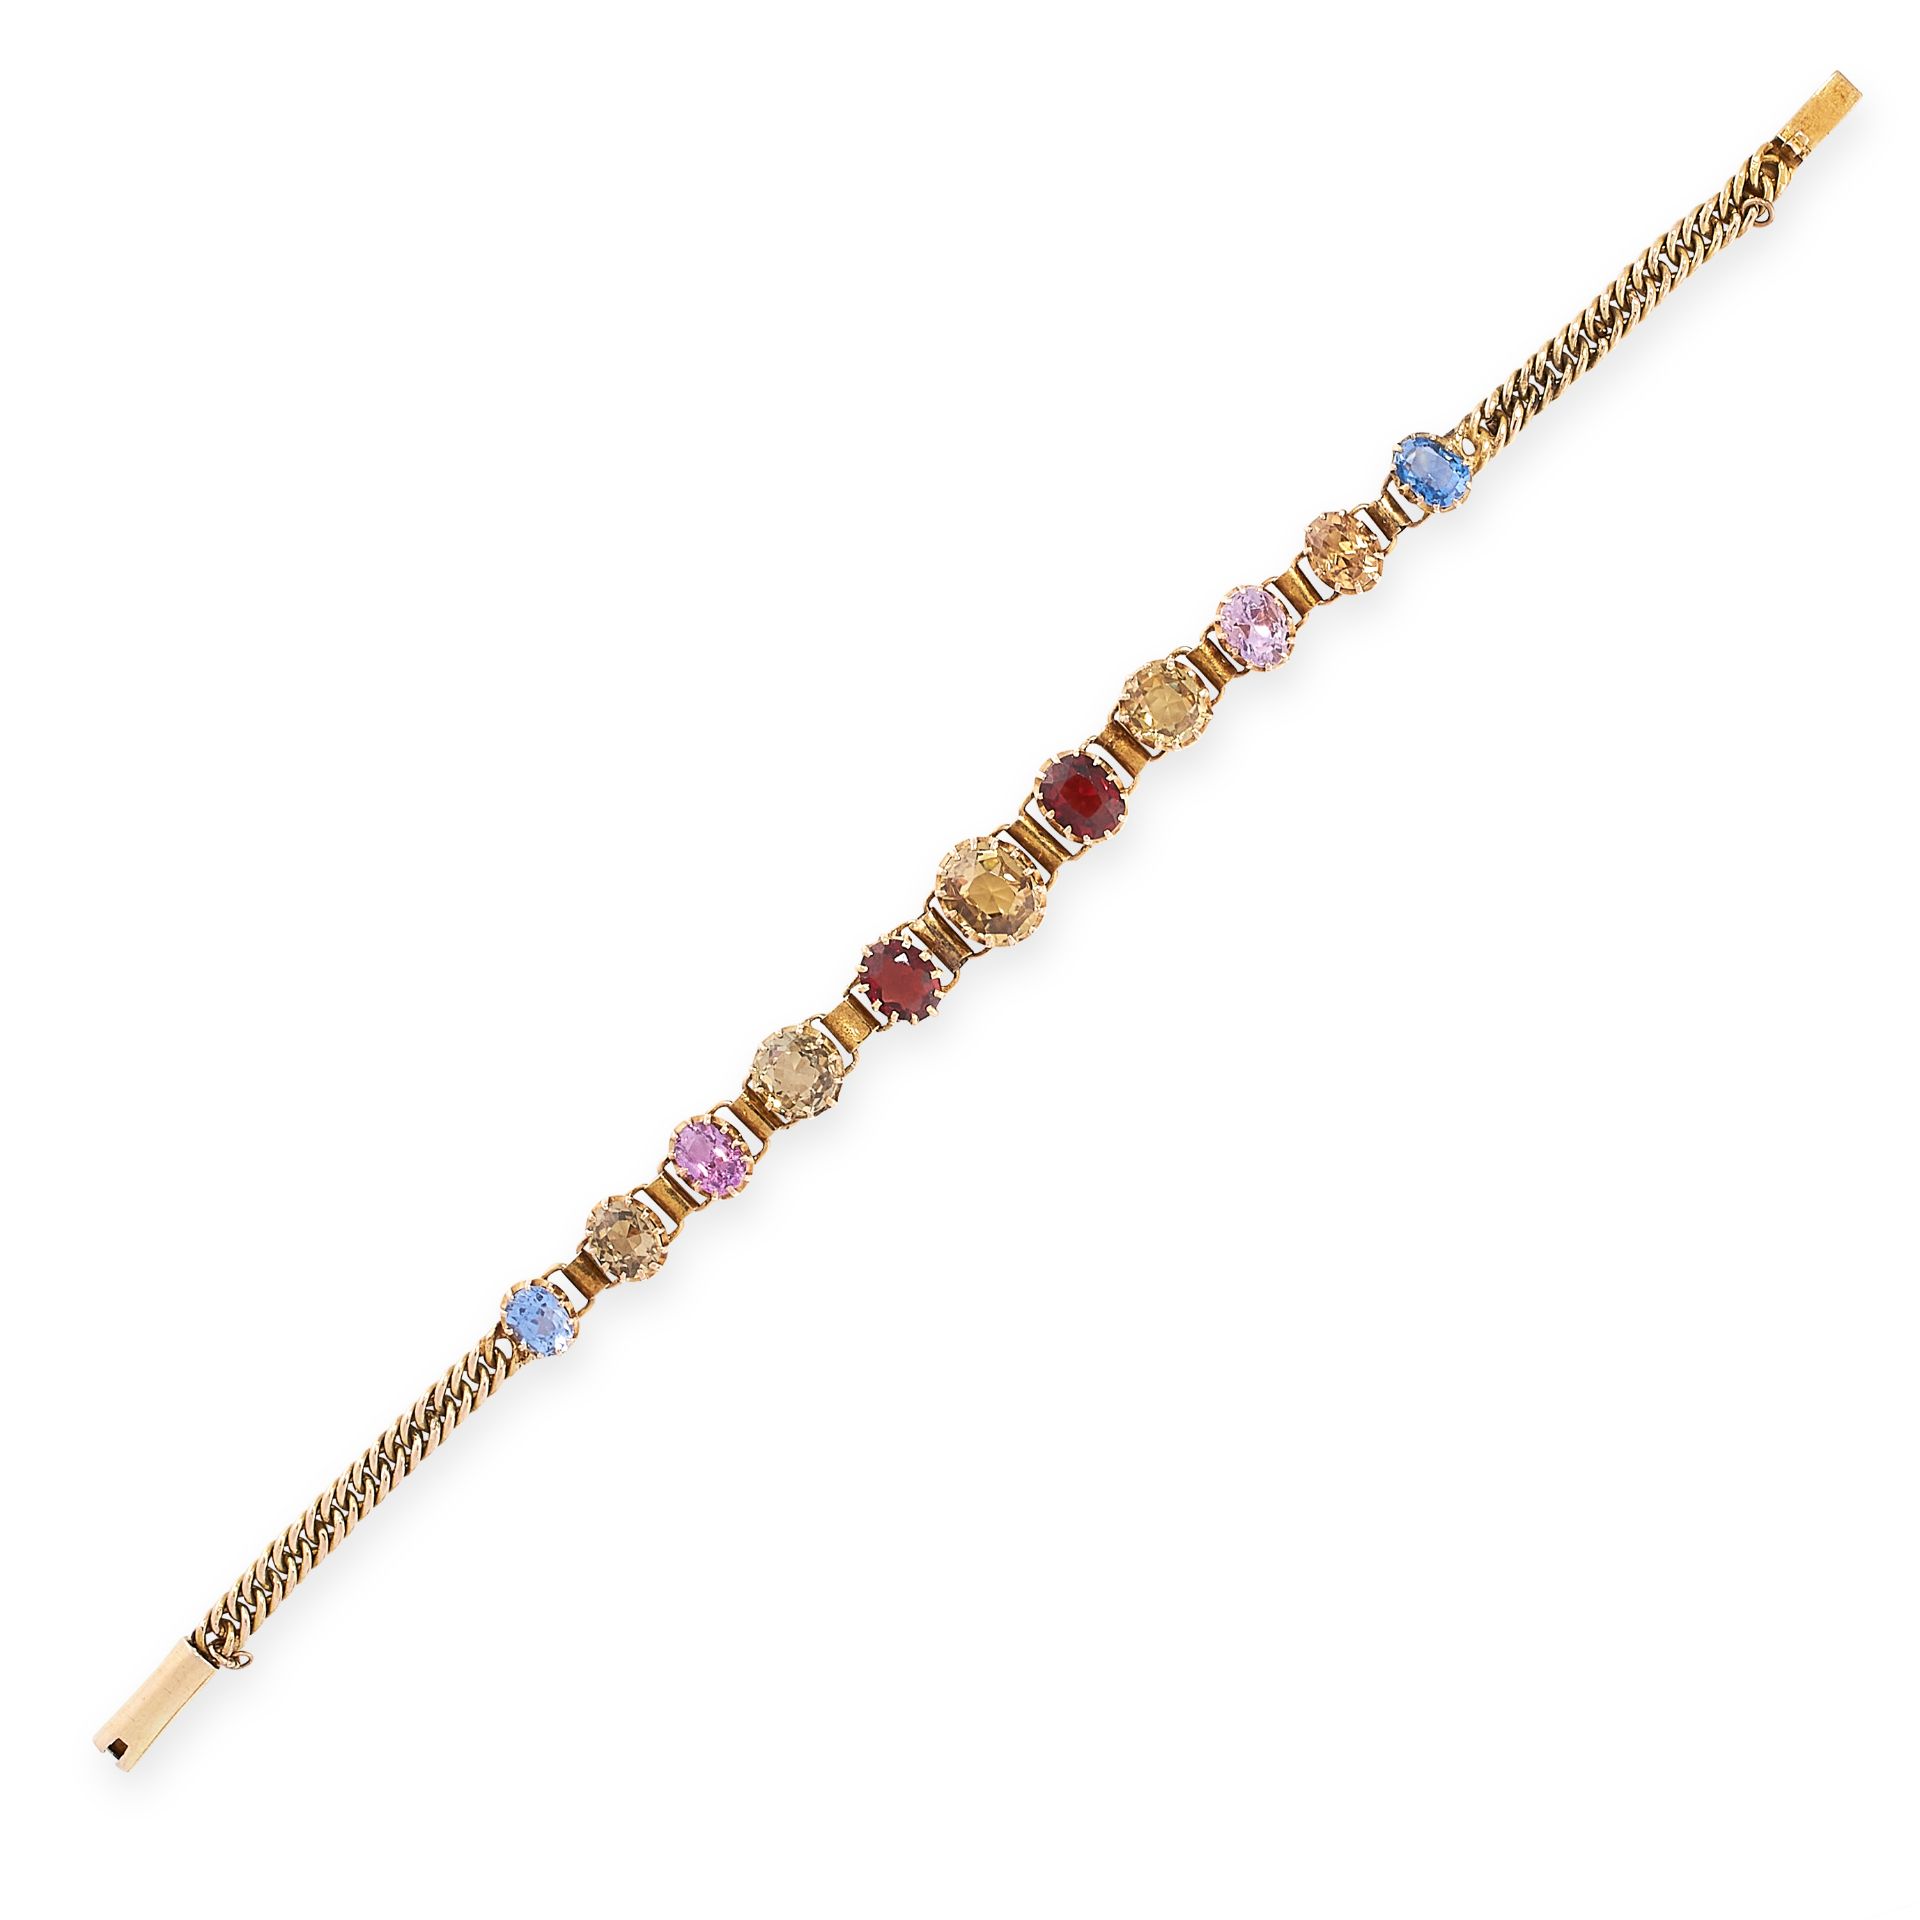 A VINTAGE GEMSET BRACELET in yellow gold, set with a row of eleven graduated cushion cut gemstones